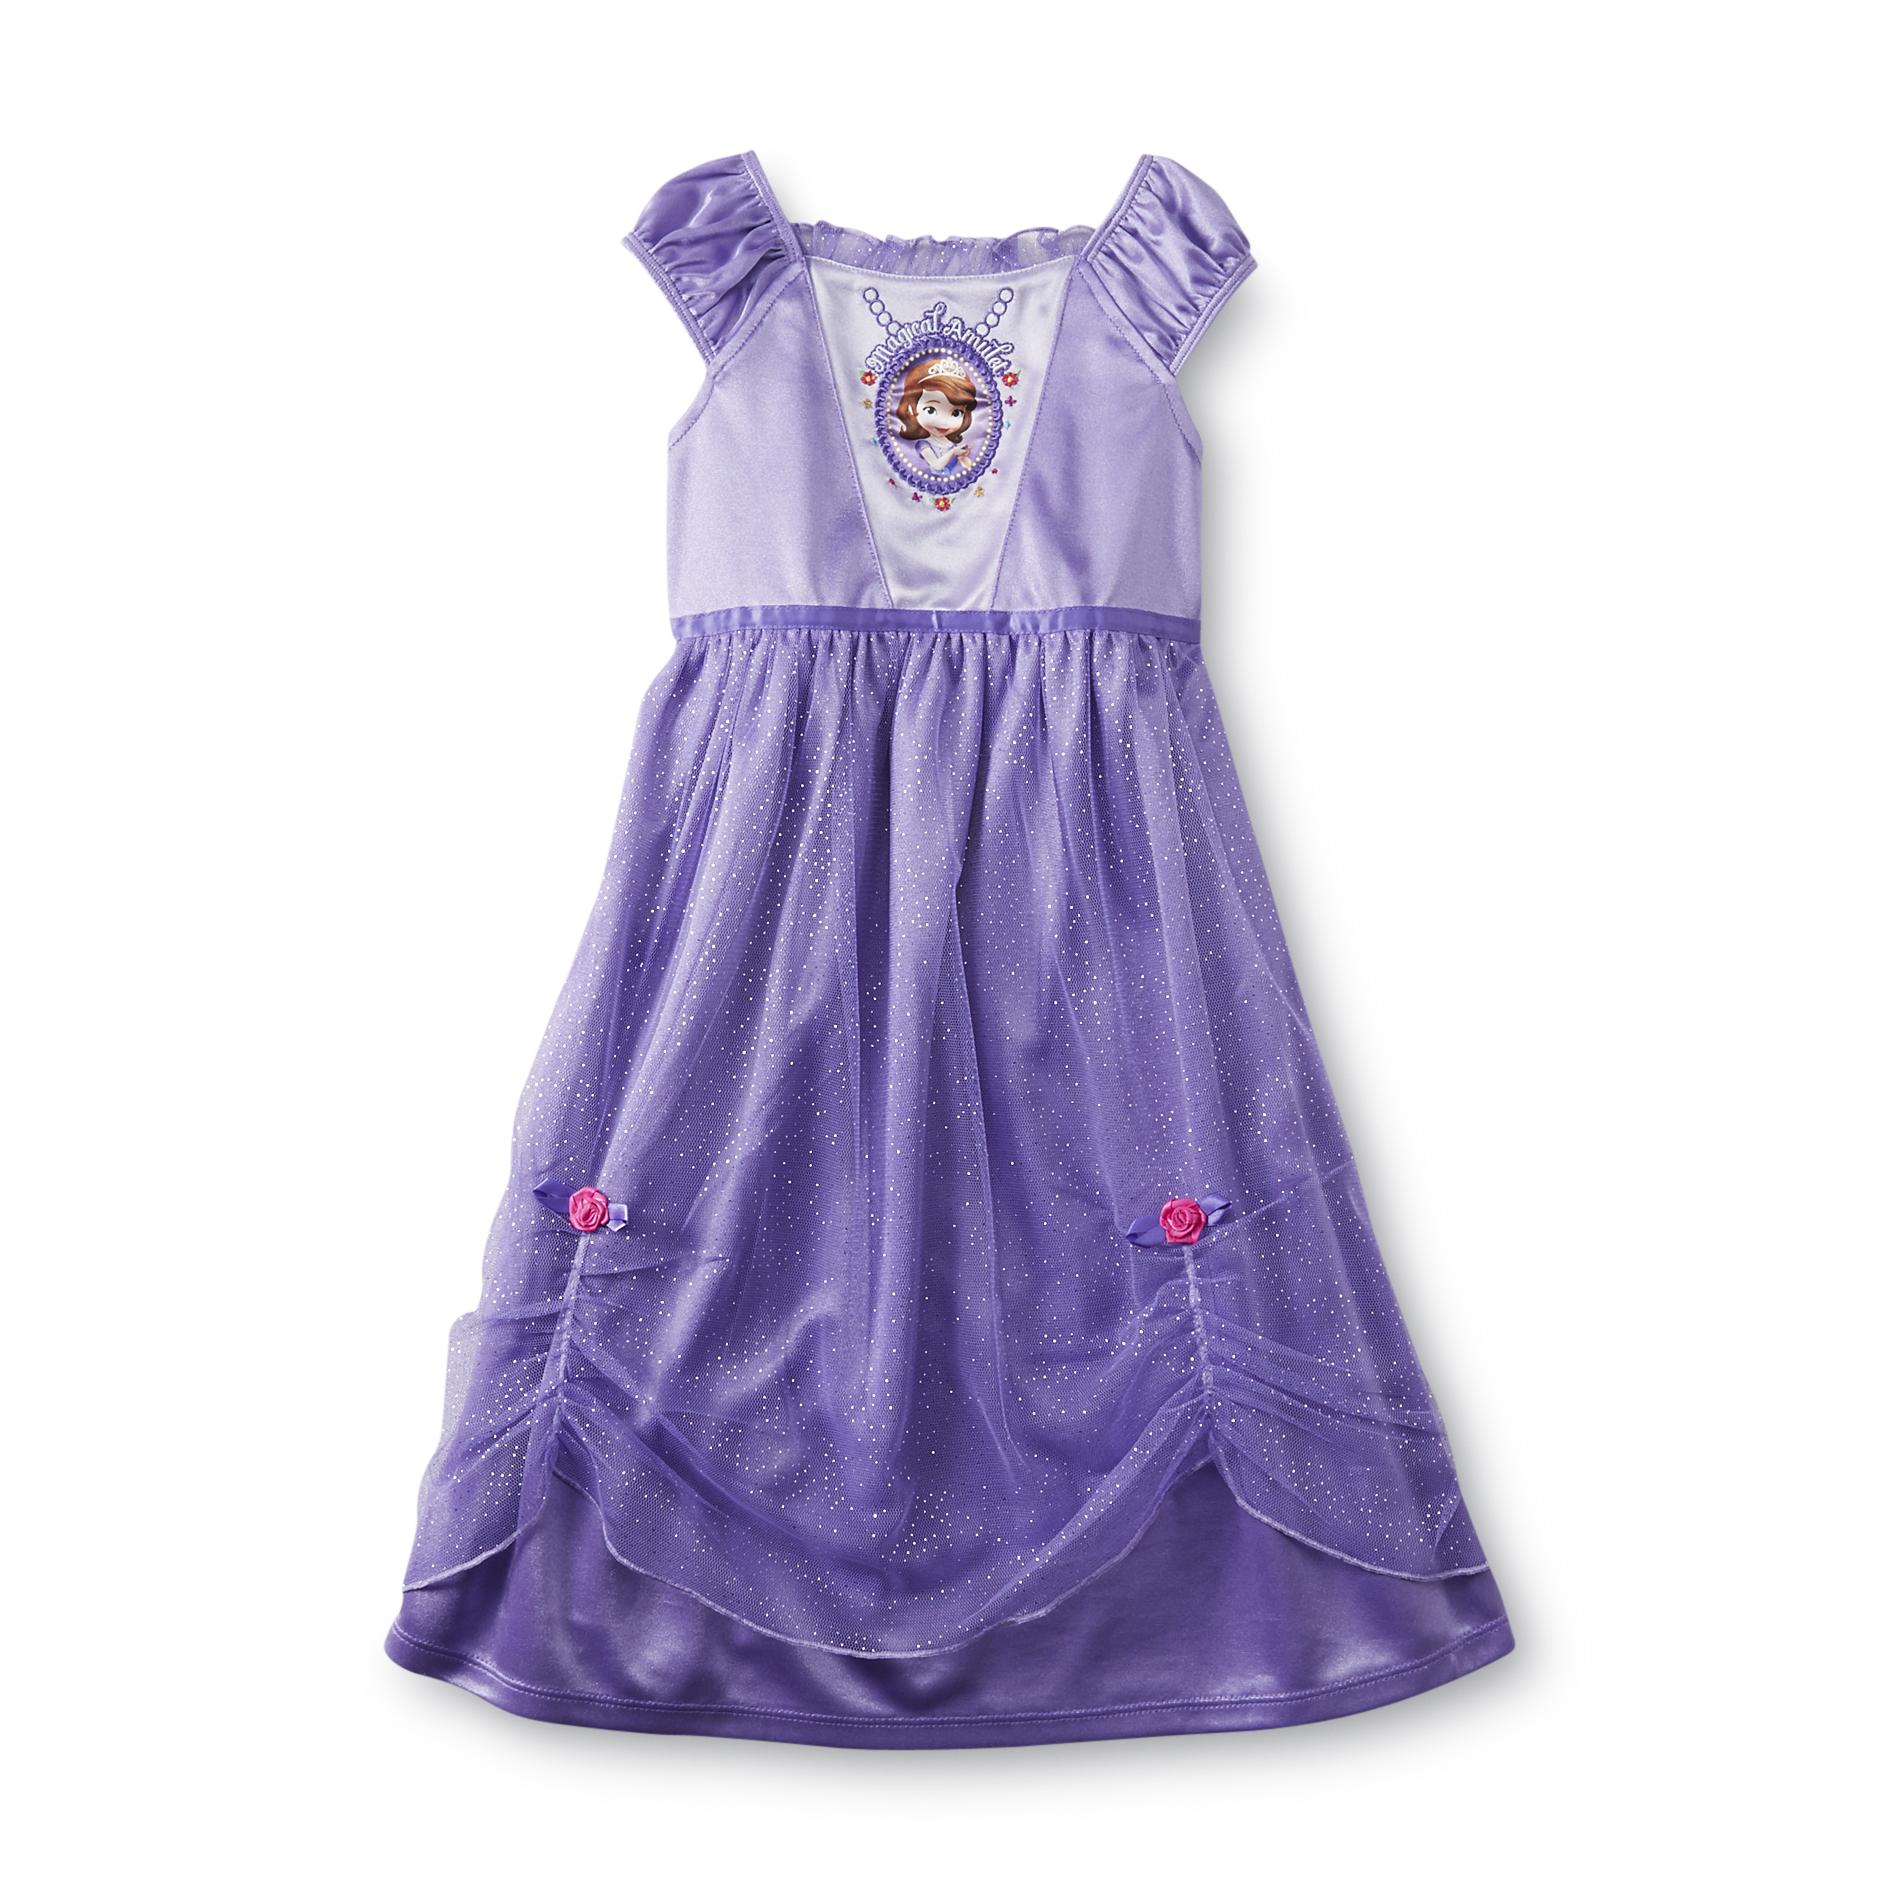 Disney Sofia the First Toddler Girl's Princess Nightgown